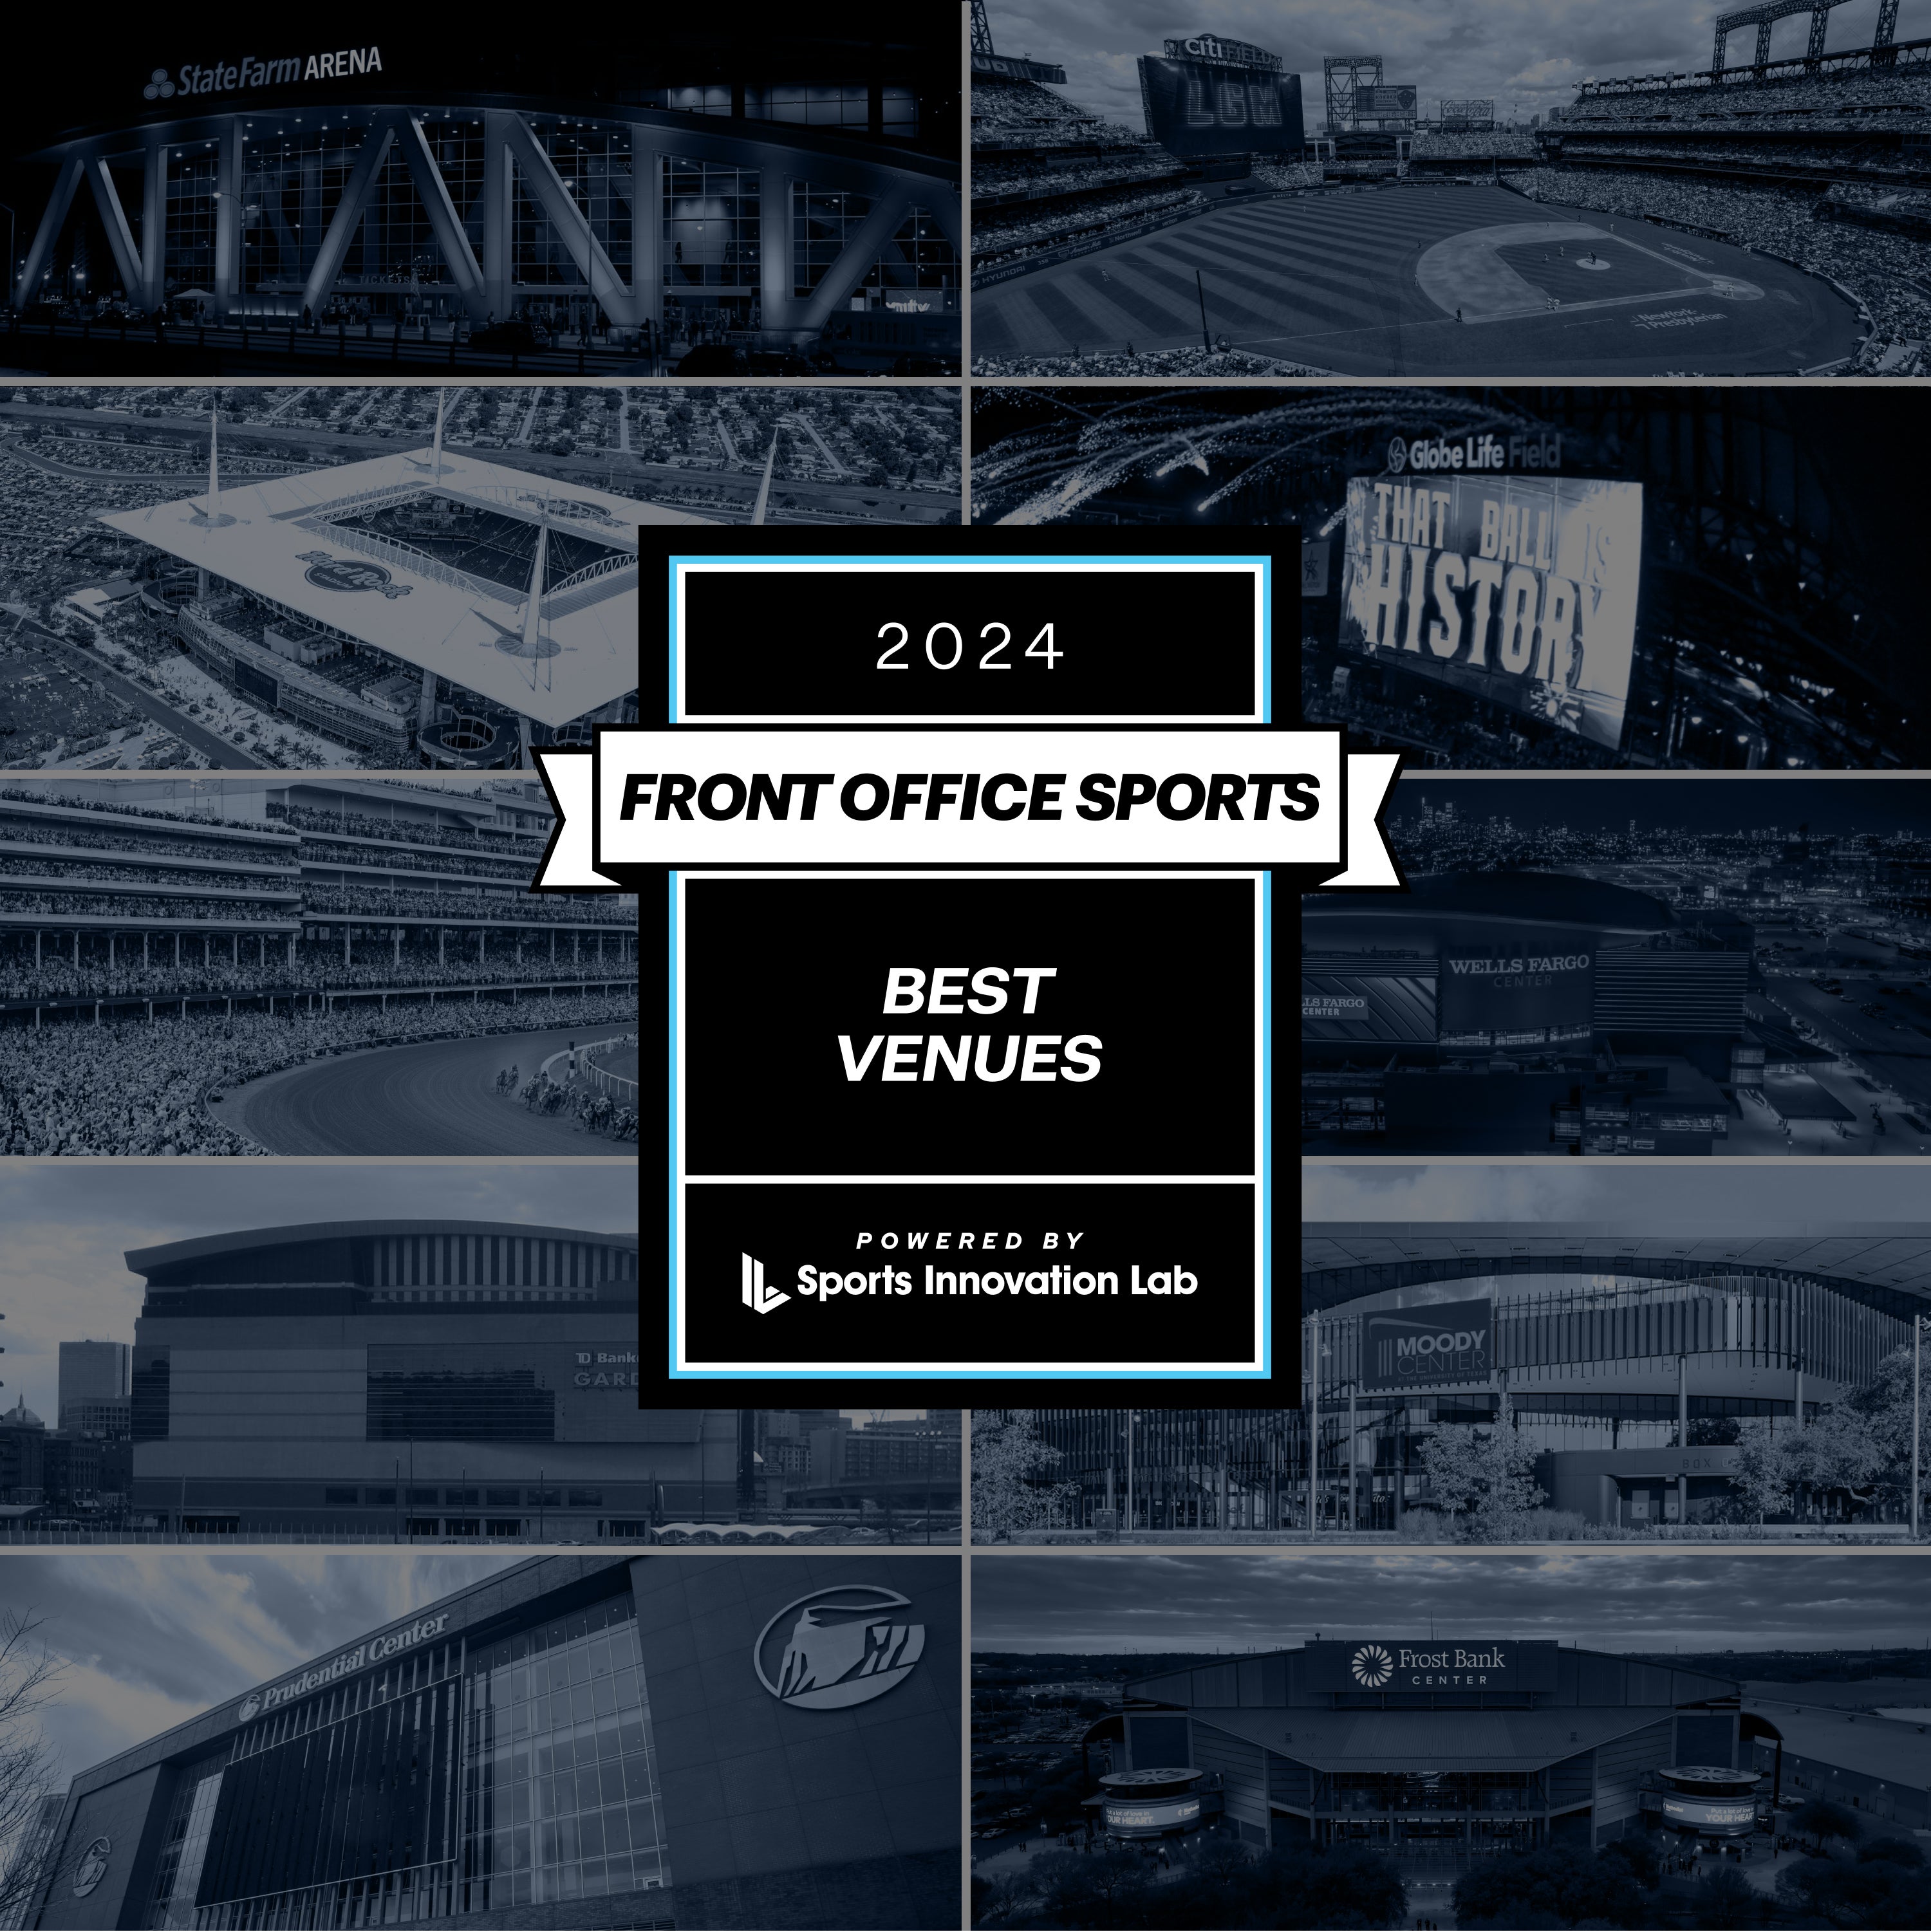 STATE FARM ARENA NAMED BEST VENUE BY ‘FRONT OFFICE SPORTS’